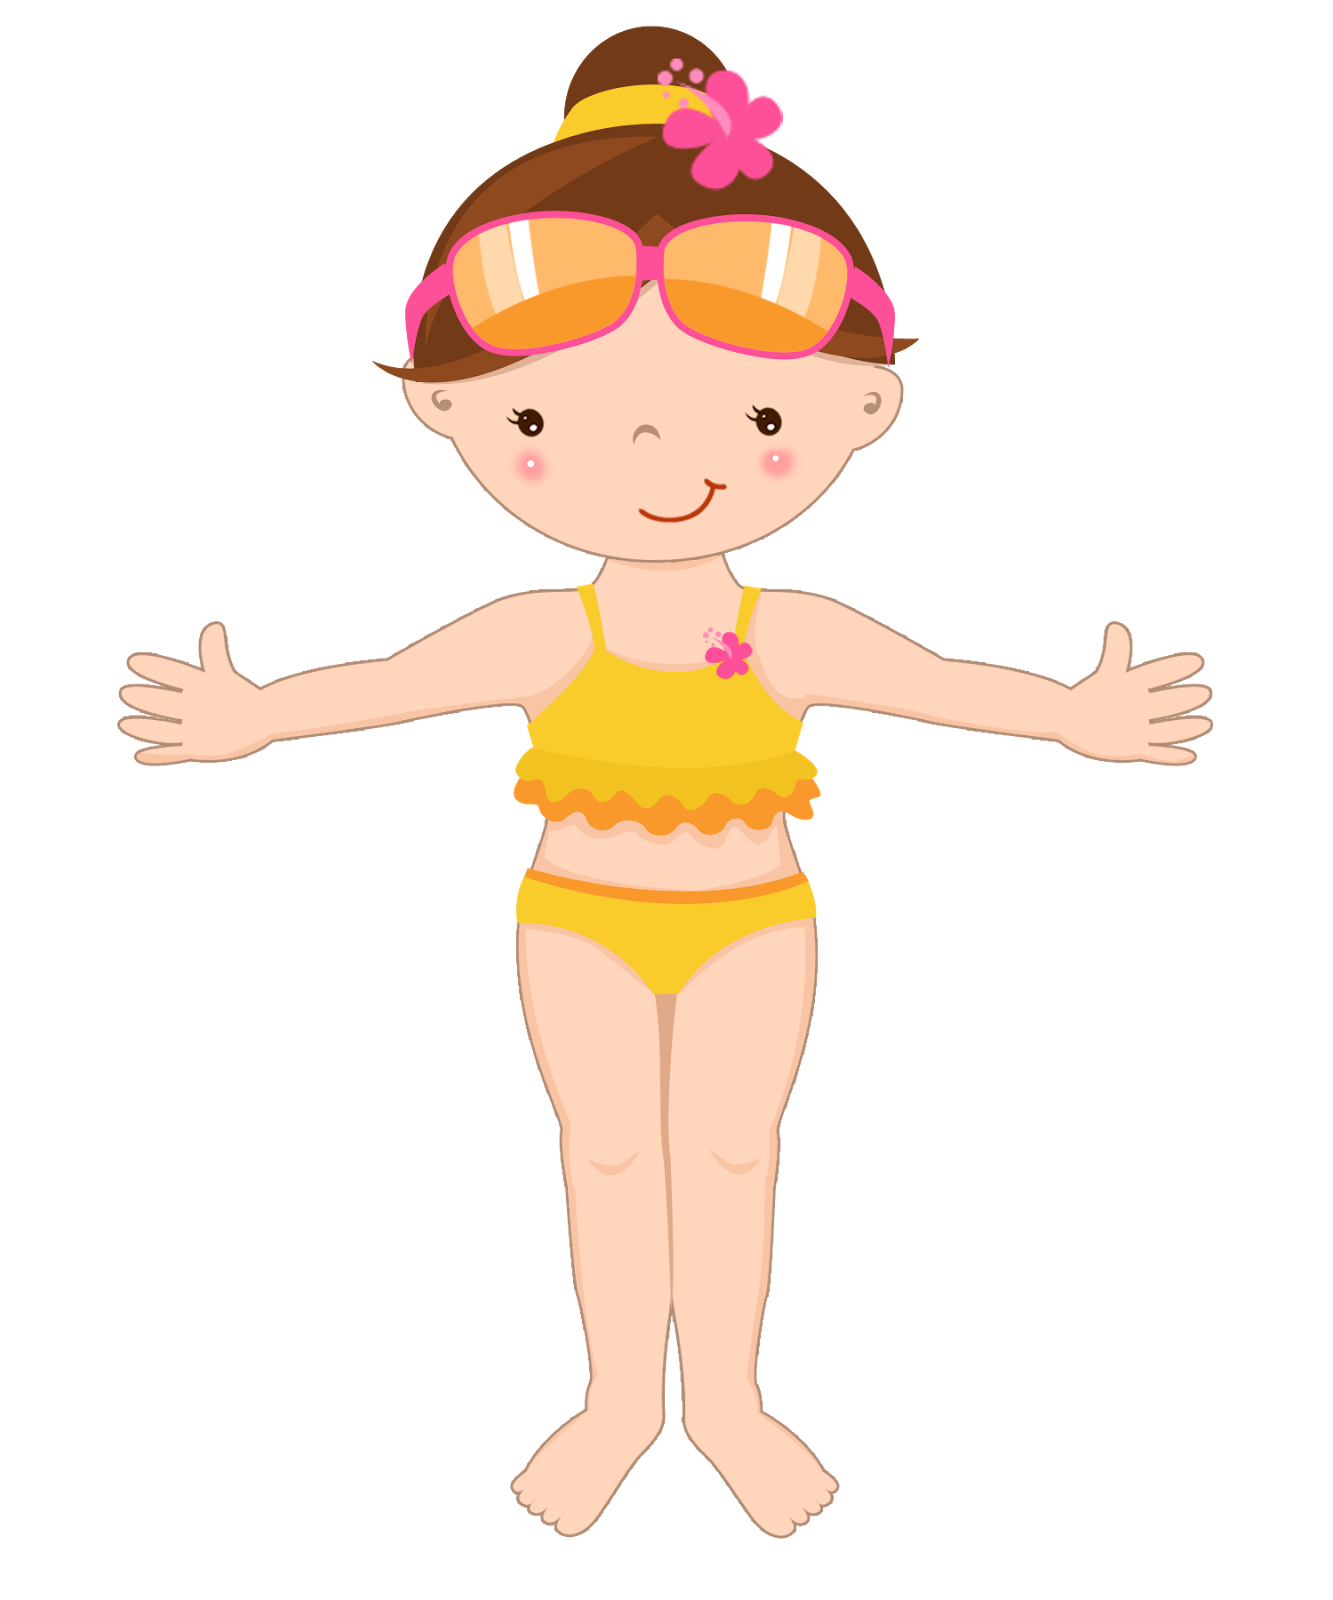 Ch b beach party. Clothespin clipart rope